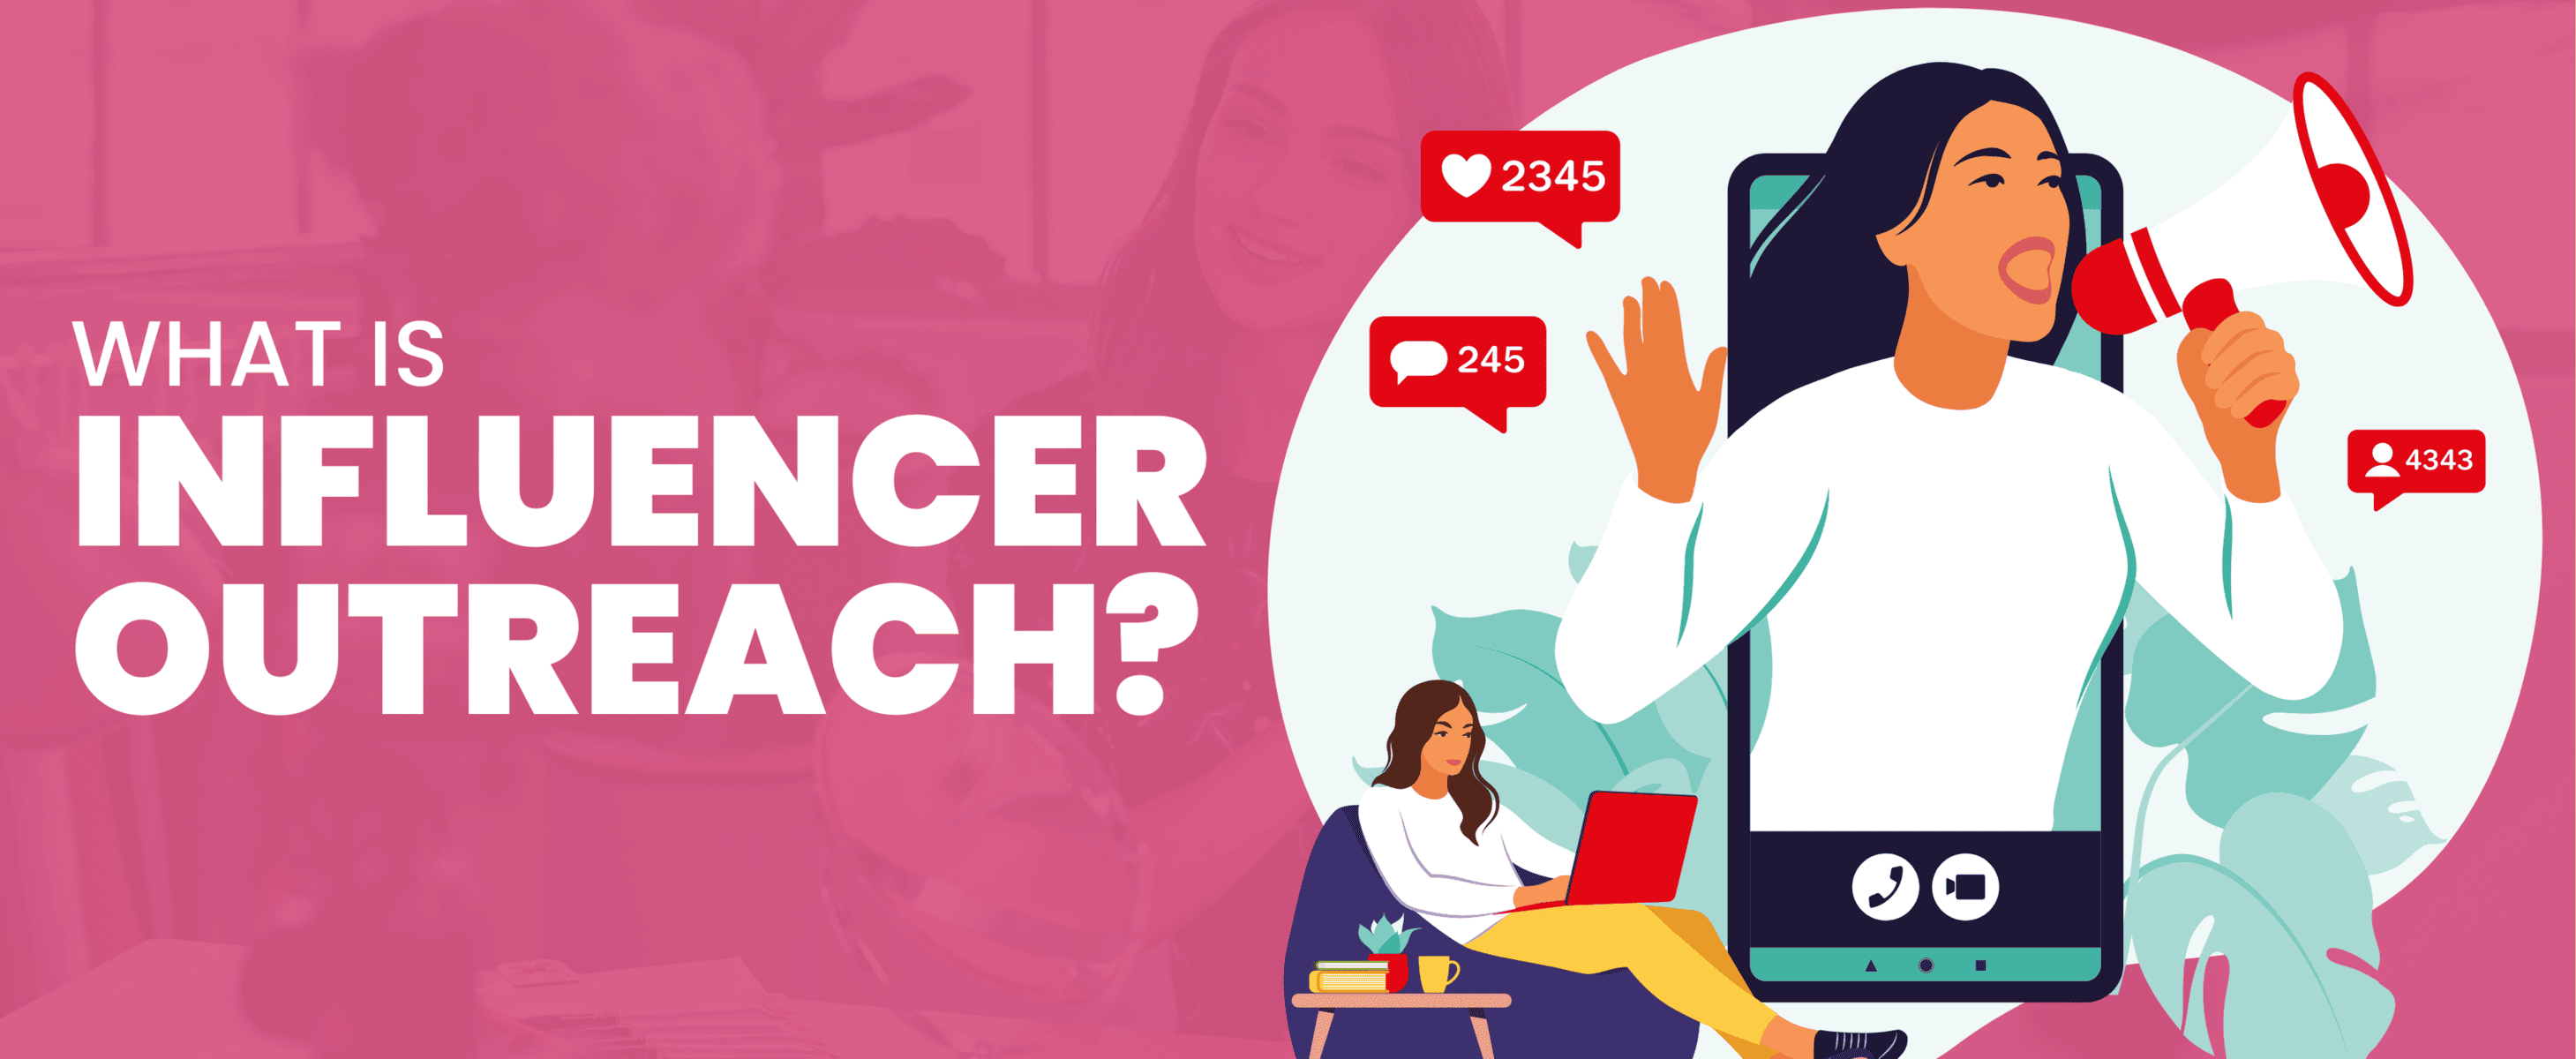 what is influencer outreach